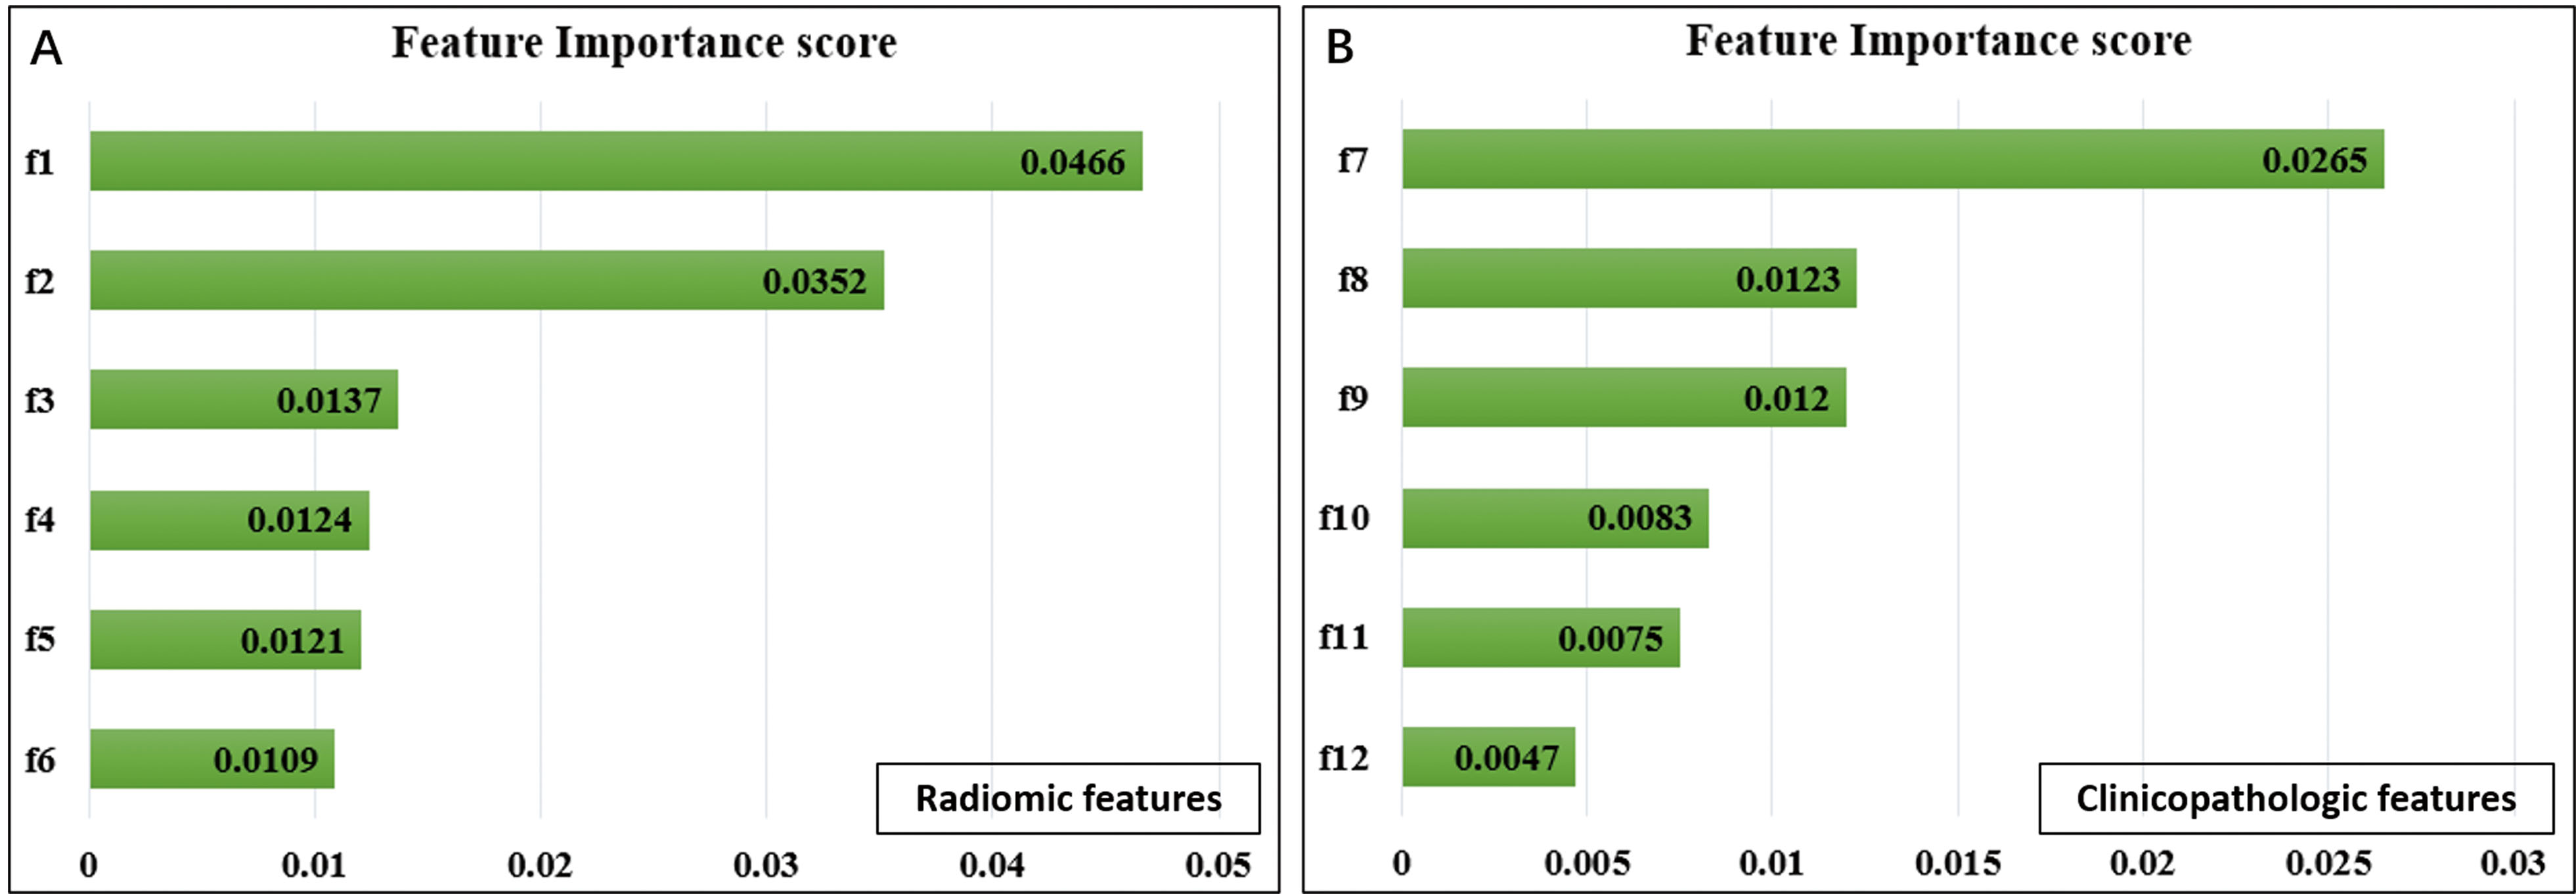 Selected radiomic features in predicting DFS. Feature importance of radiomic (A) and clinicopathologic features (B). f1, CT_wavelet-HLH_gldm_SmallDependenceHighGrayLevelEmphasis; f2, CT_log-sigma-4-0-mm-3D_glrlm_RunVariance; f3, CT_log-sigma-4-0-mm-3D_gldm_LowGrayLevelEmphasis; f4, CT_log-sigma-5-0-mm-3D_glrlm_LongRunHighGrayLevelEmphasis; f5, CT_log-sigma-5-0-mm-3D_gldm_DependenceNonUniformity; f6, PET_original_glcm_SumSquares; f7, TLG; f8, LVSI; f9, lymph node metastasis; f10, deep stromal invasion; f11, preoperative SCCA level; f12, FIGO stage.